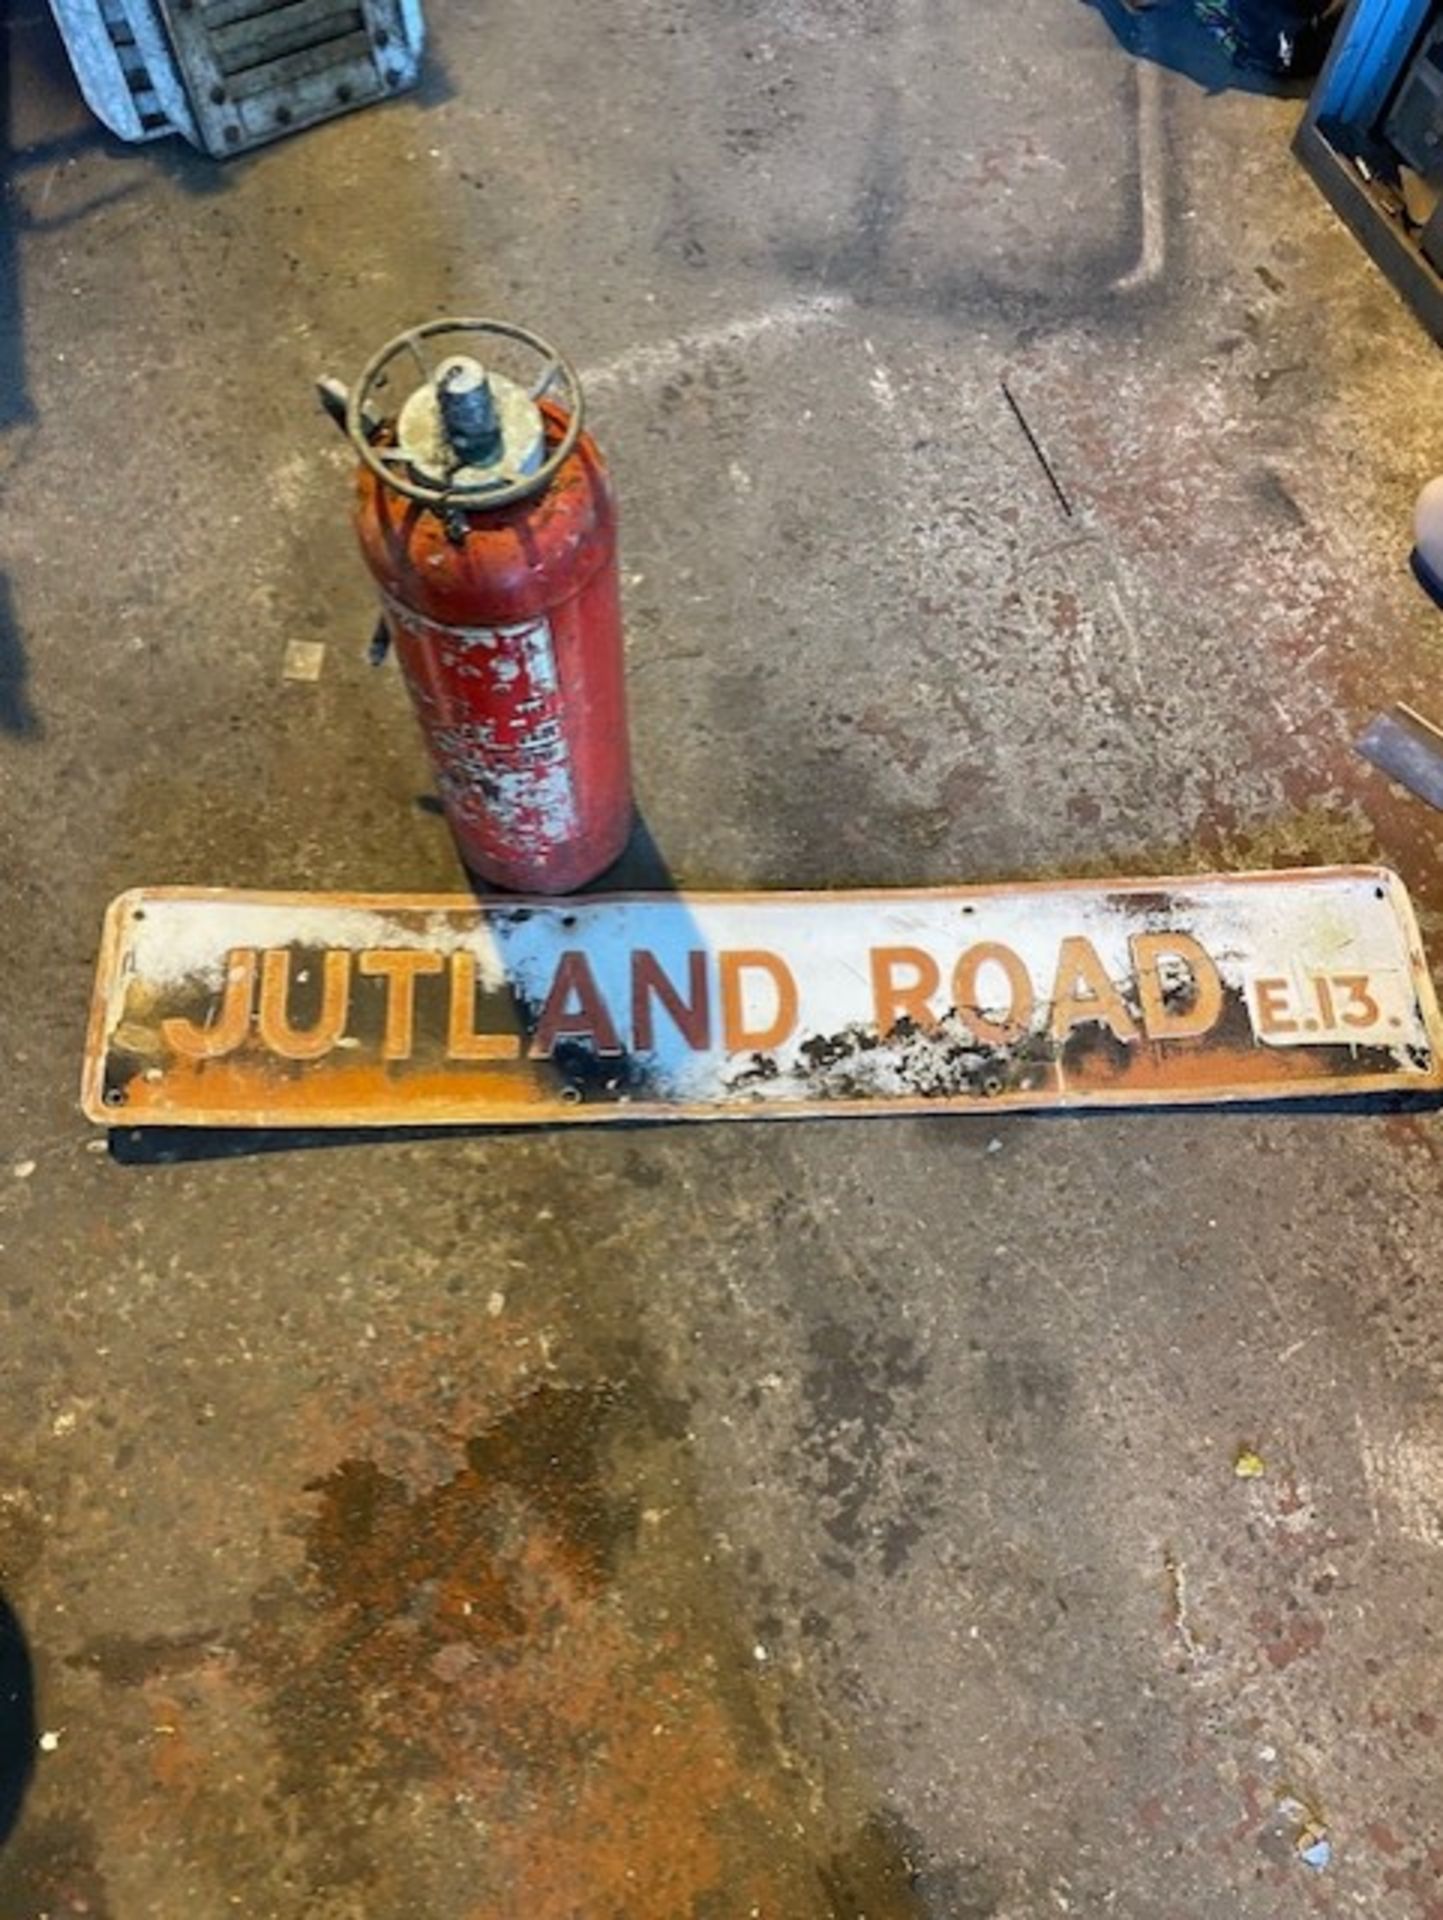 Vintage street sign Jutland road e13 And a vintage empty fire extinguisher will sell seperate also